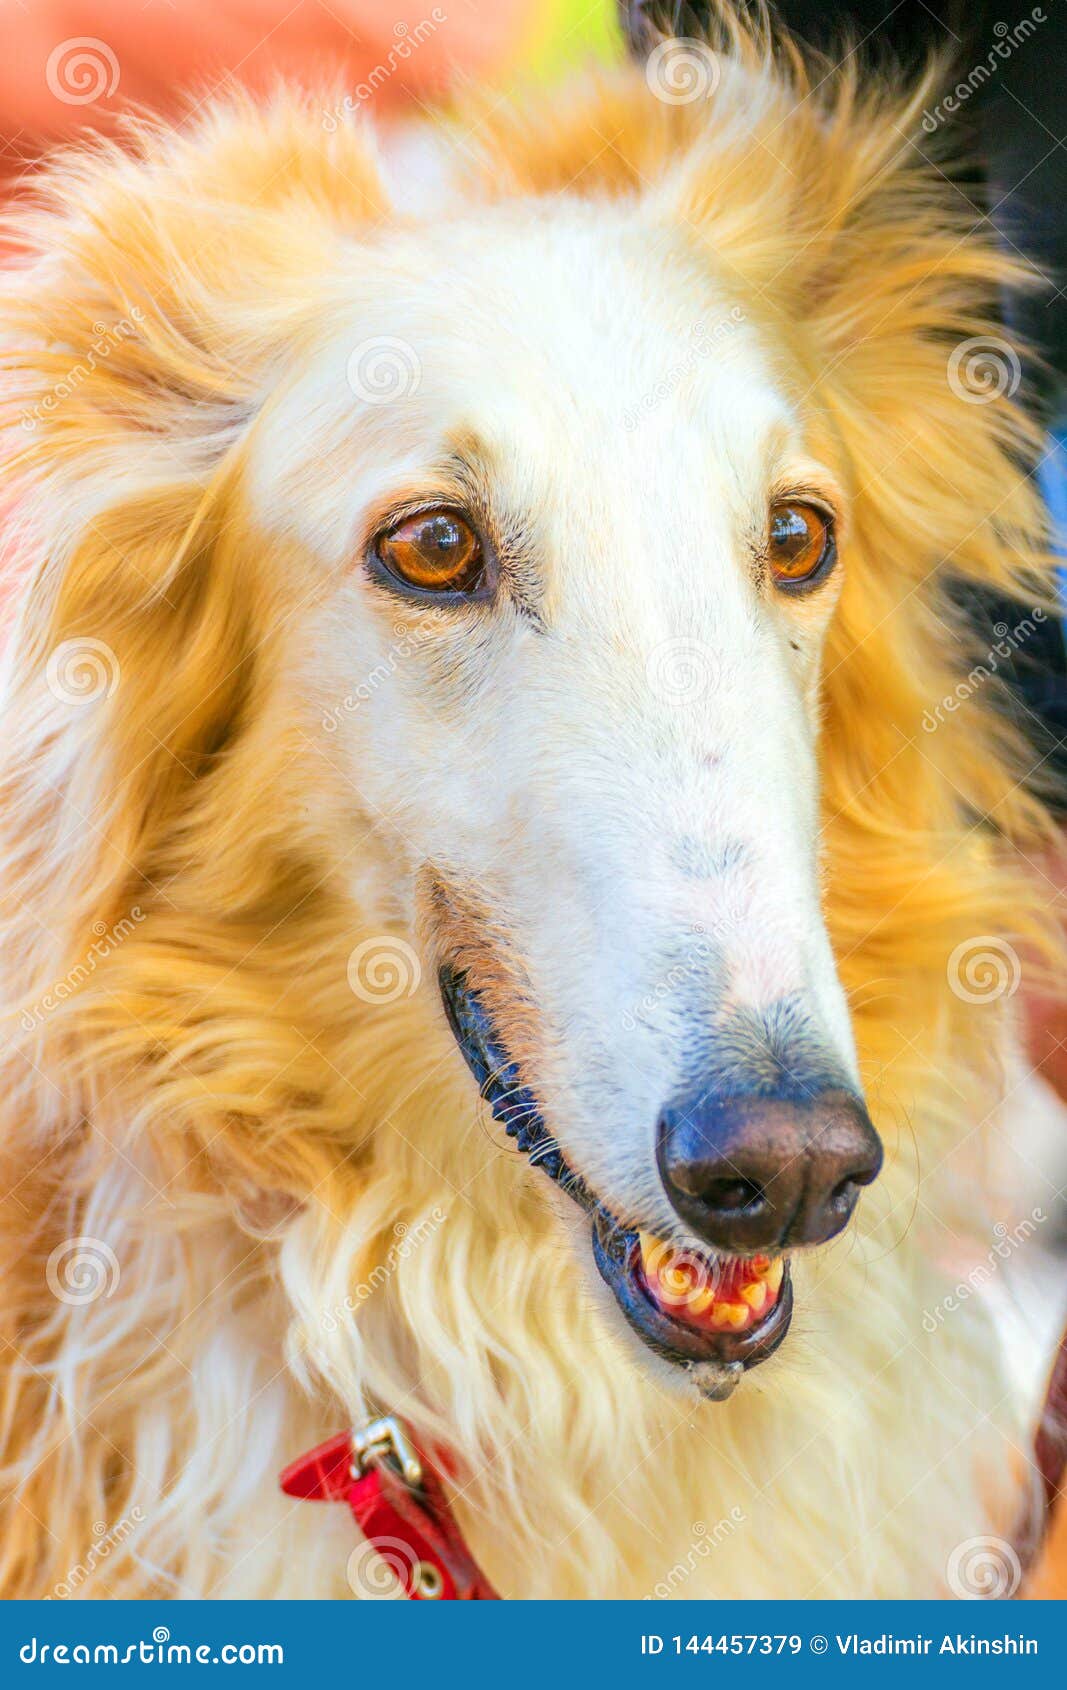 A Man Stands With A Large White Dog Breed Russian Greyhound Editorial Stock Image Image Of Funny Face 144457379